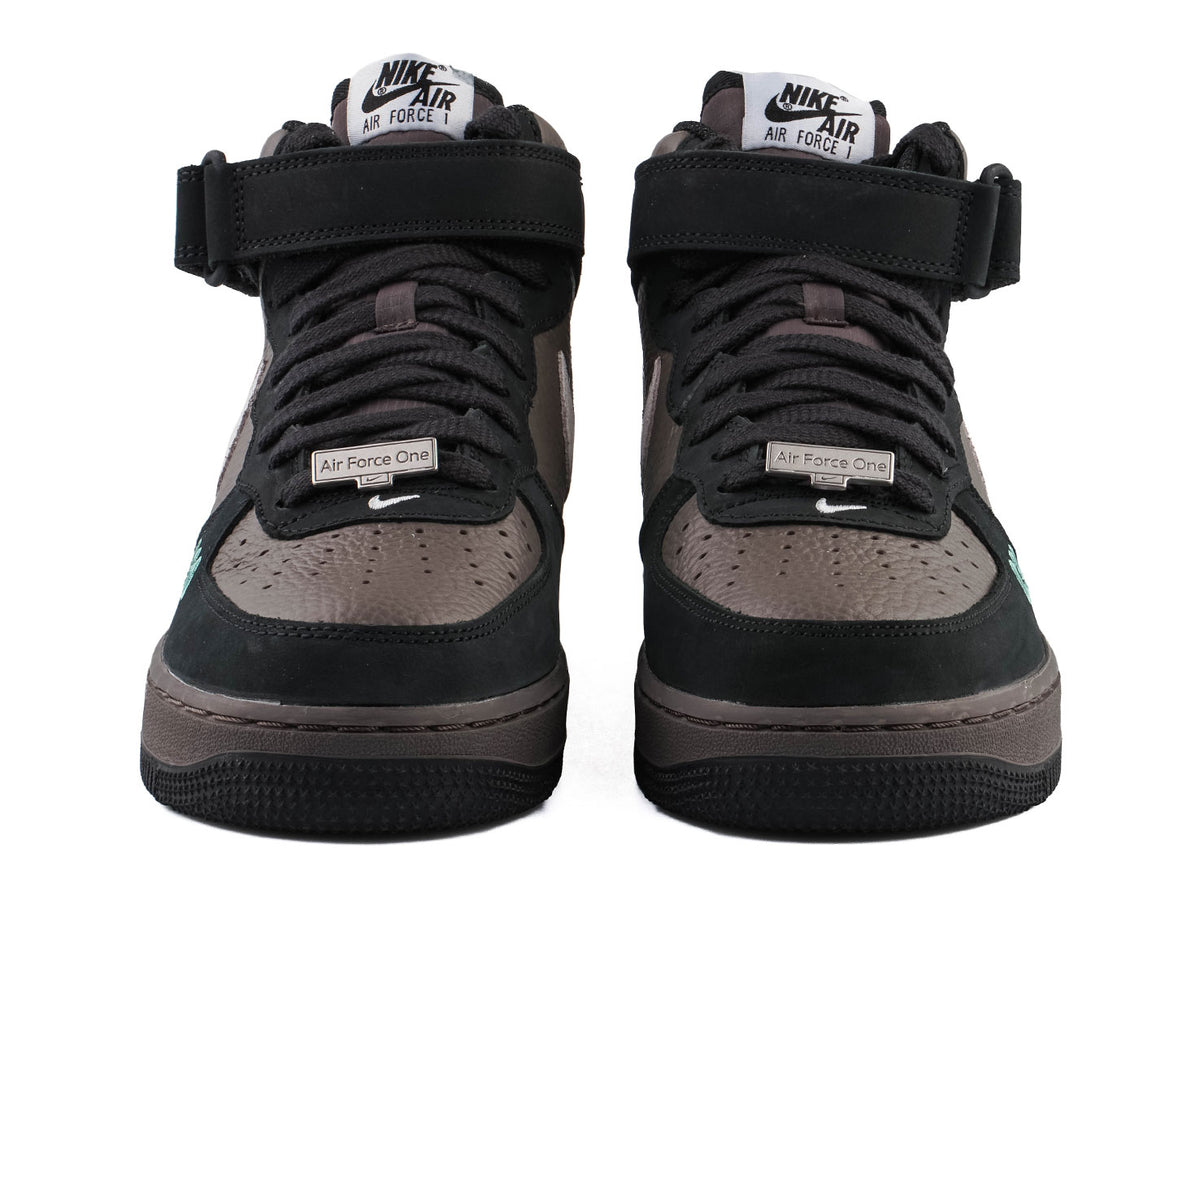 Nike - Air Force 1 MID NH 2 (Cave Stone/White-Off Noir)